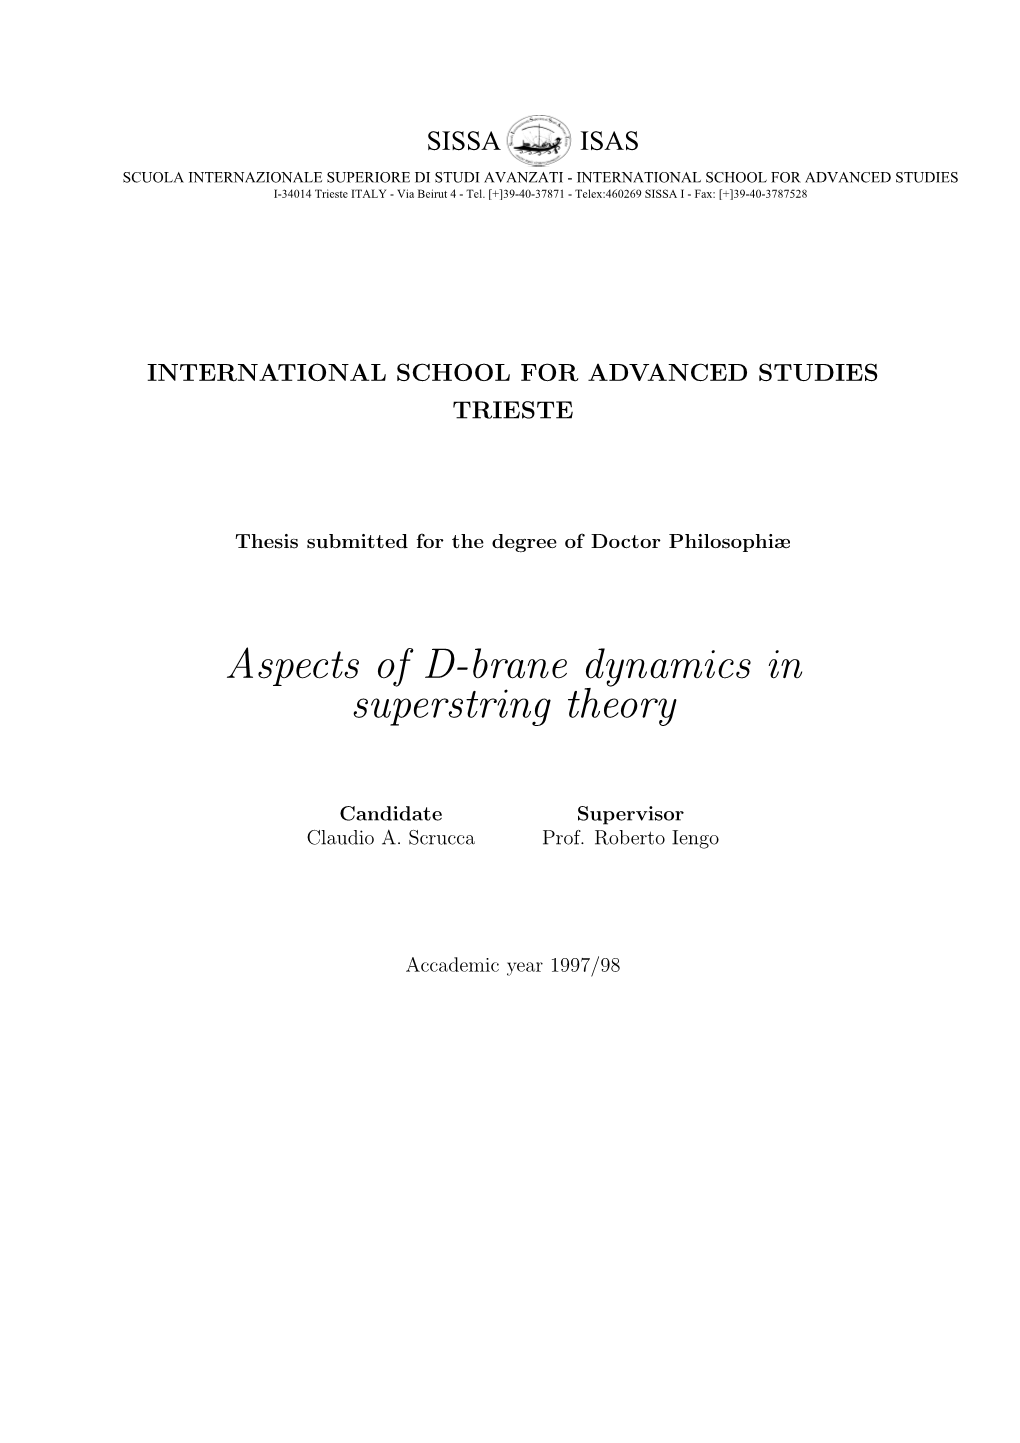 Aspects of D-Brane Dynamics in Superstring Theory